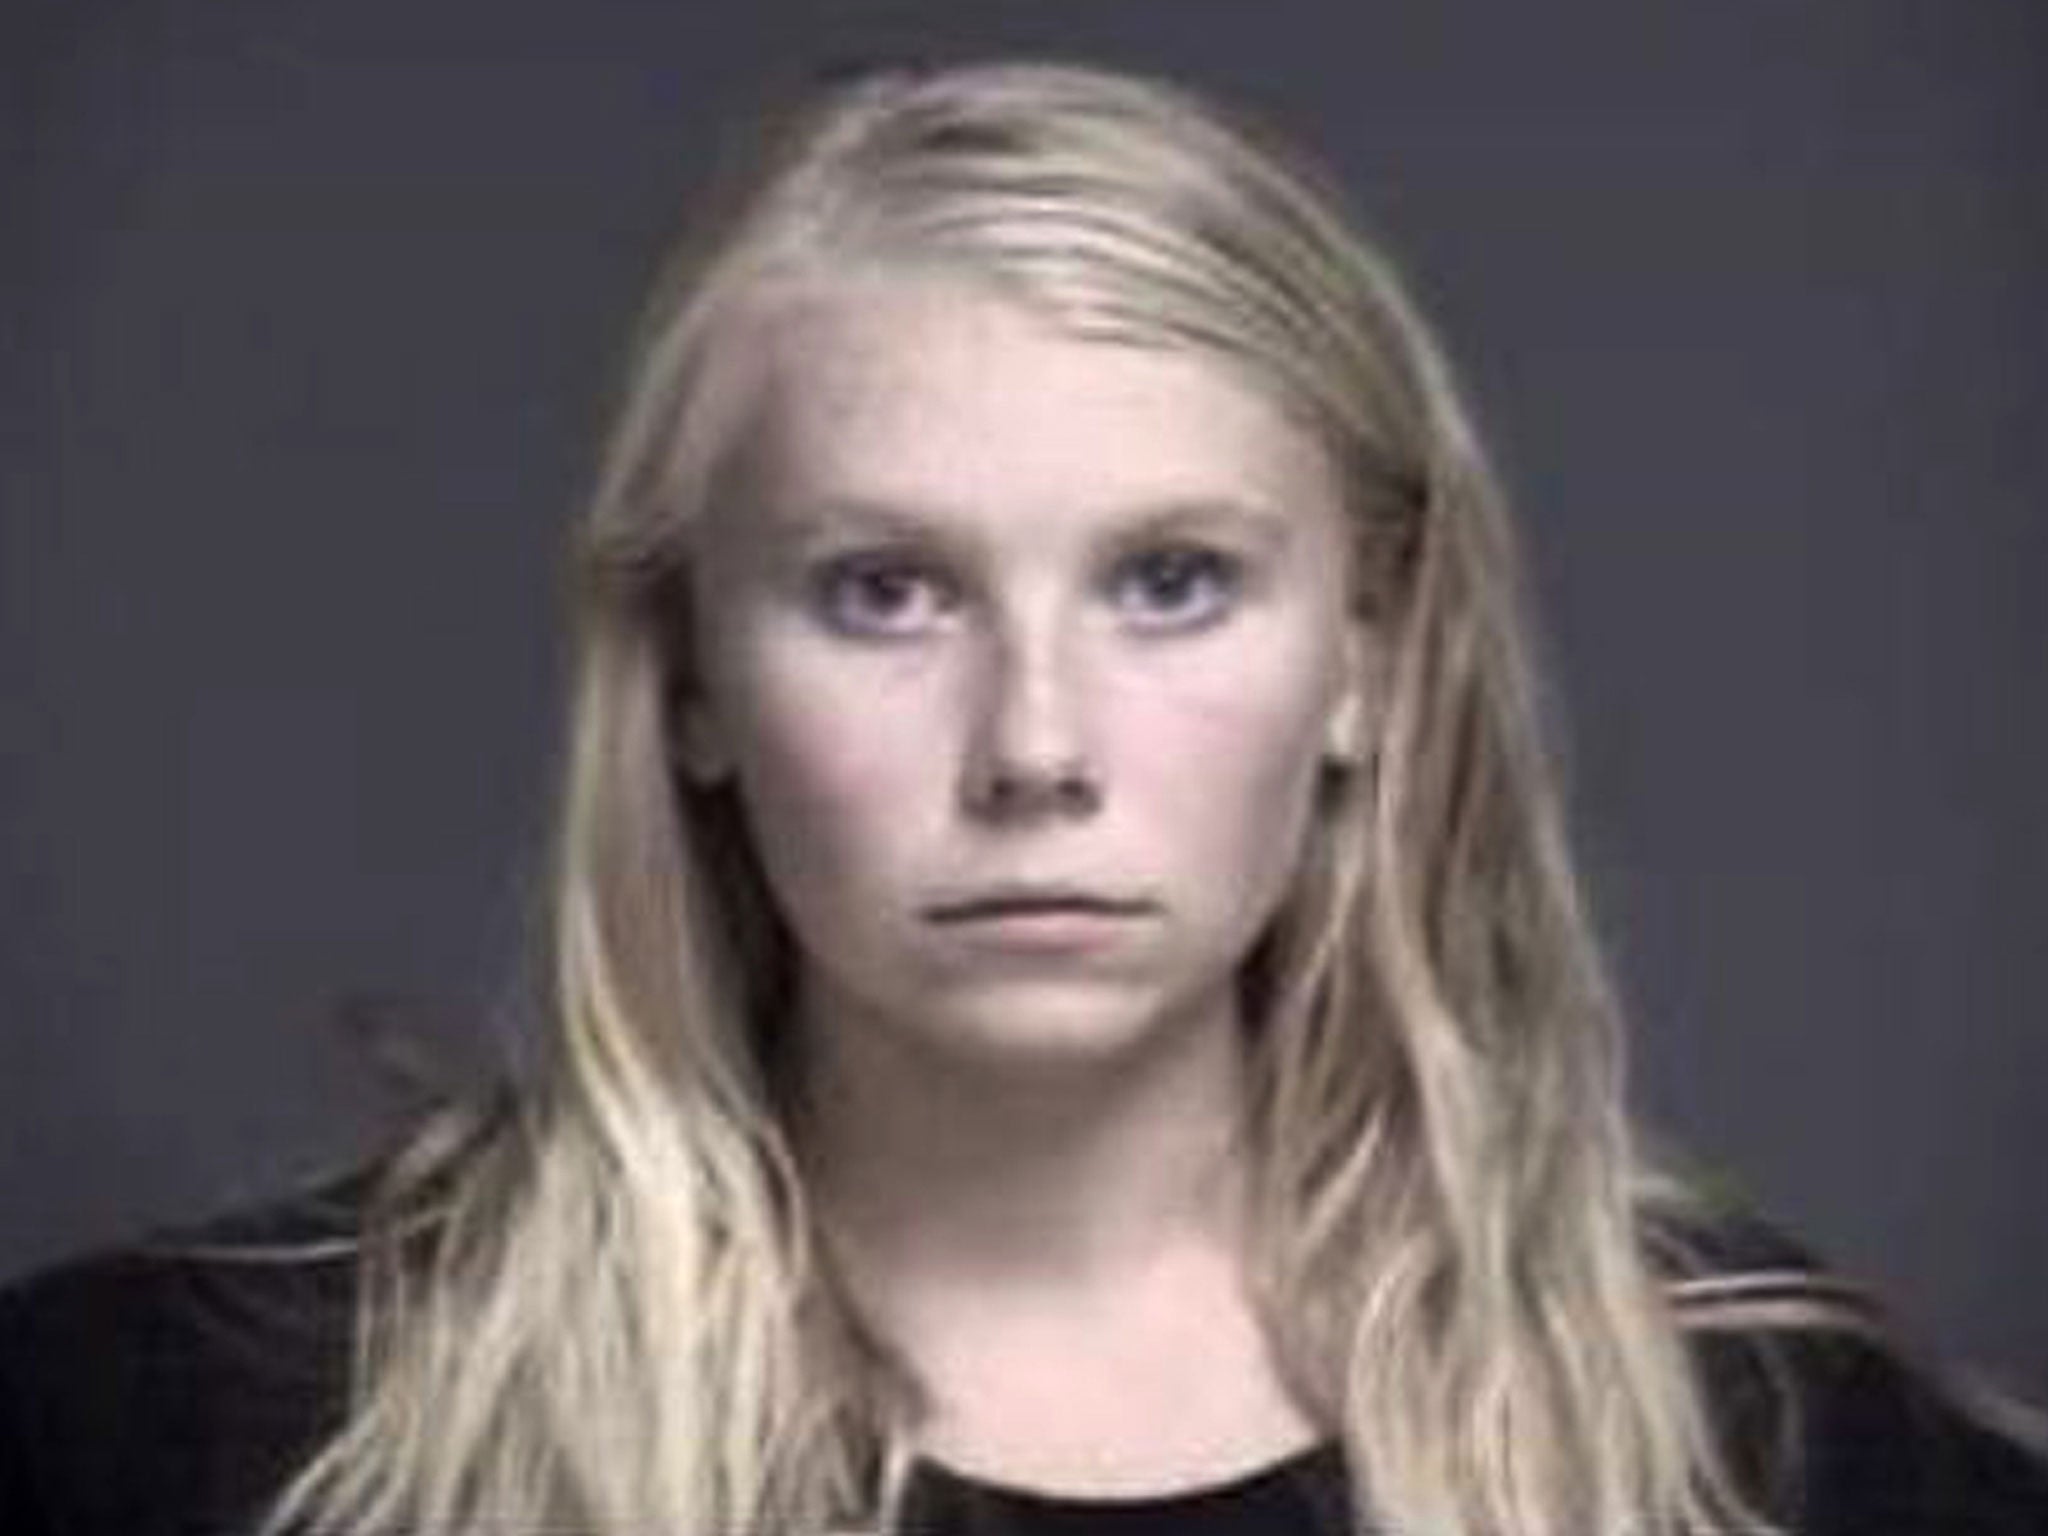 Brooke Skylar Richardson, whose newborn infant's remains were buried outside her southwest Ohio home, pleaded not guilty to aggravated murder and other charges